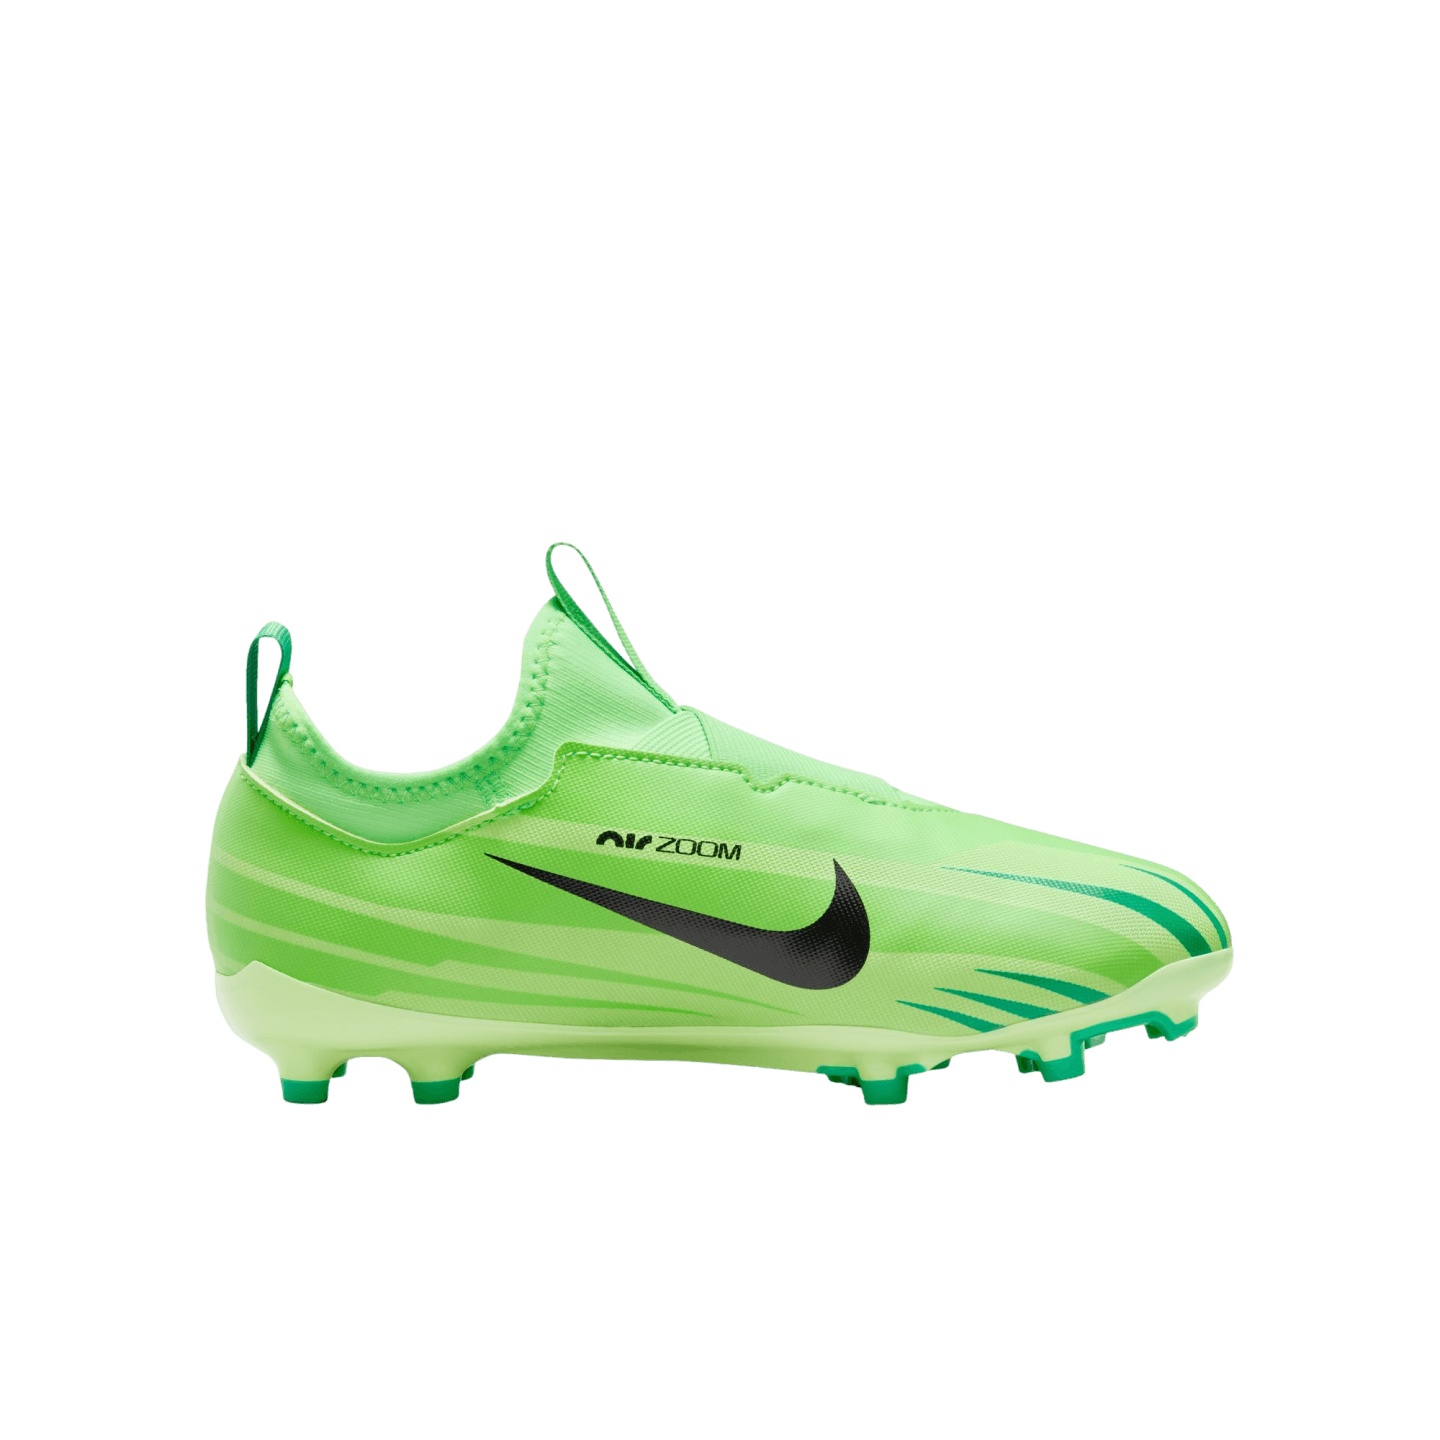 Nike Mercurial Vapor 15 Academy MDS Youth Firm Gorund Cleats